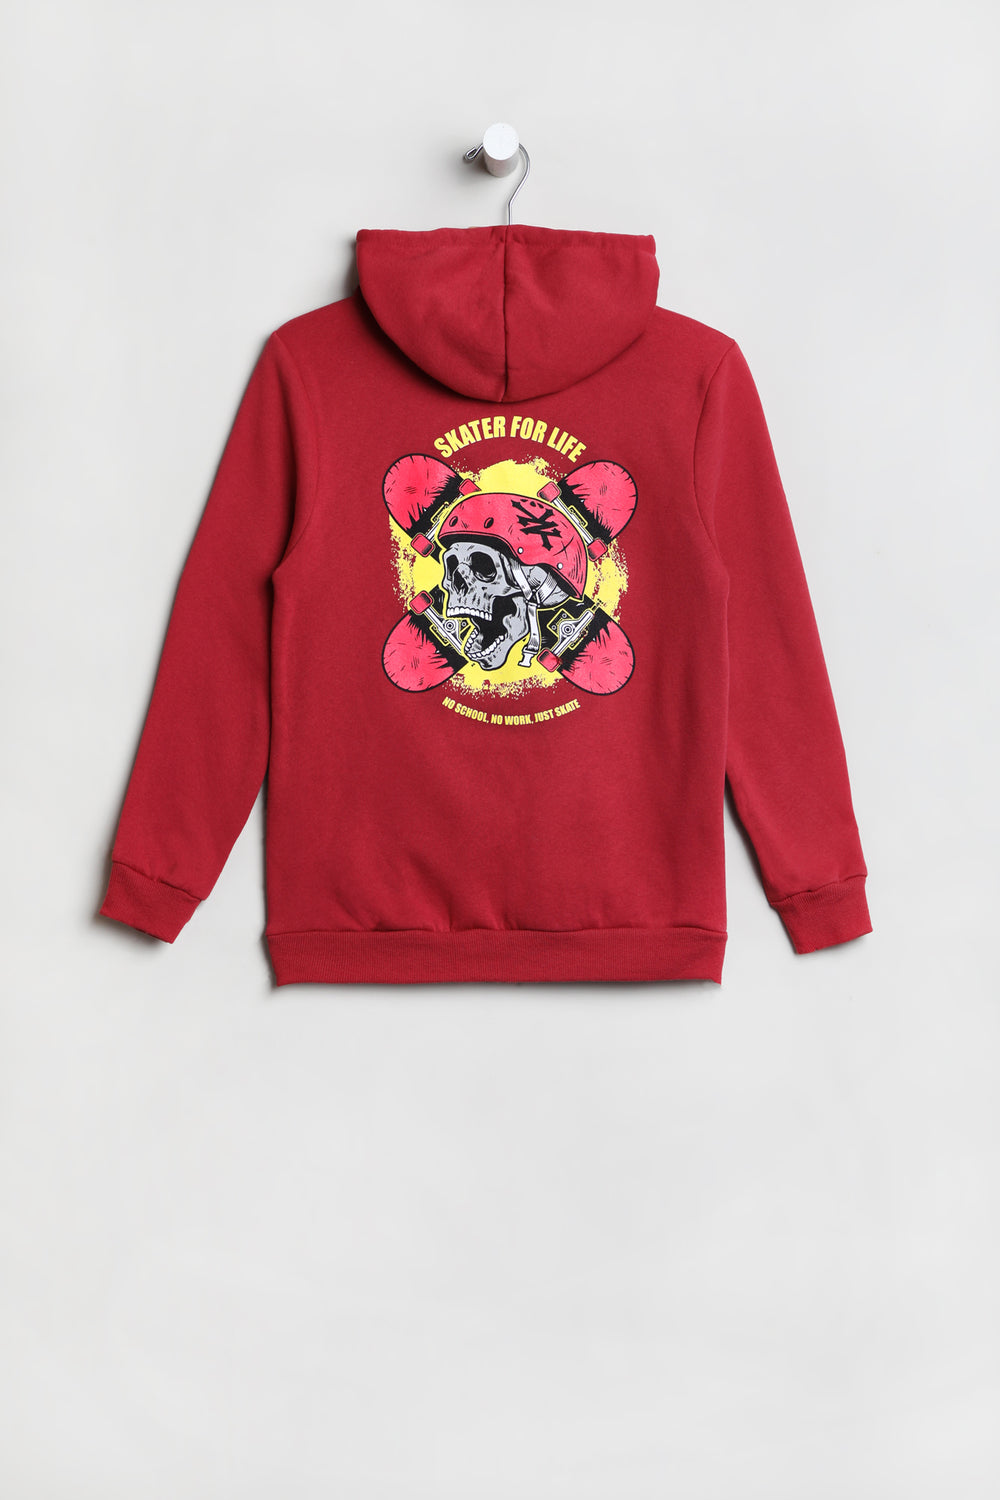 Zoo York Youth Skater For Life Hoodie Zoo York Youth Skater For Life Hoodie